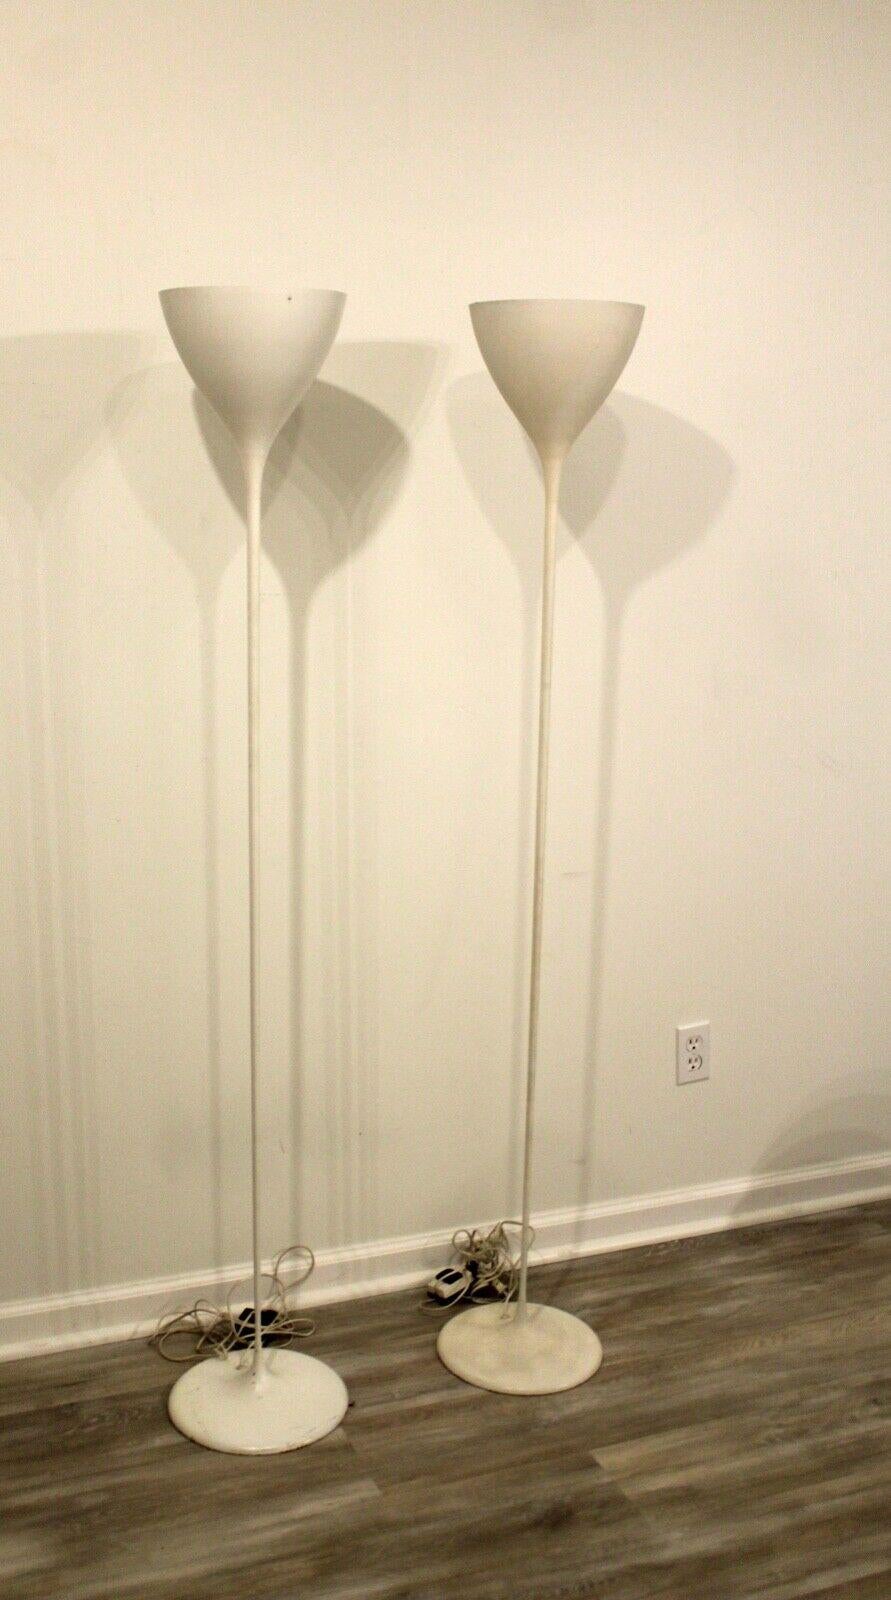 We present a pair of iconic white metal torchiere lamps by swiss designer Max Bill, circa 1960's. In very good condition. Dimensions: 11.5